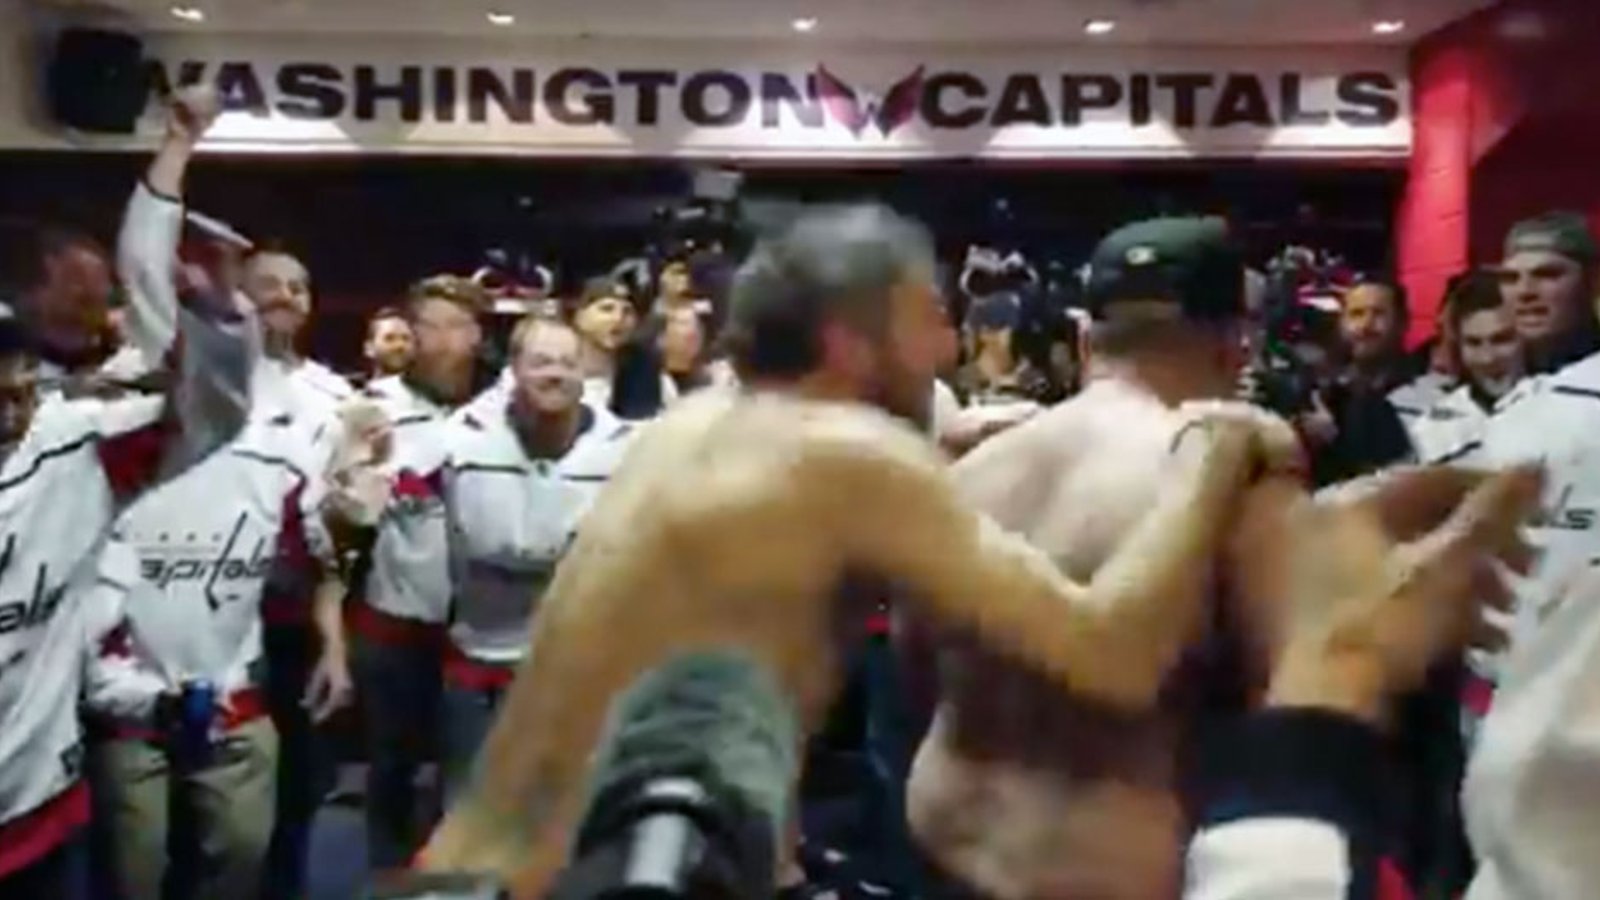 Ovi pops off his shirt then goes for a piggy back ride around the Caps locker room